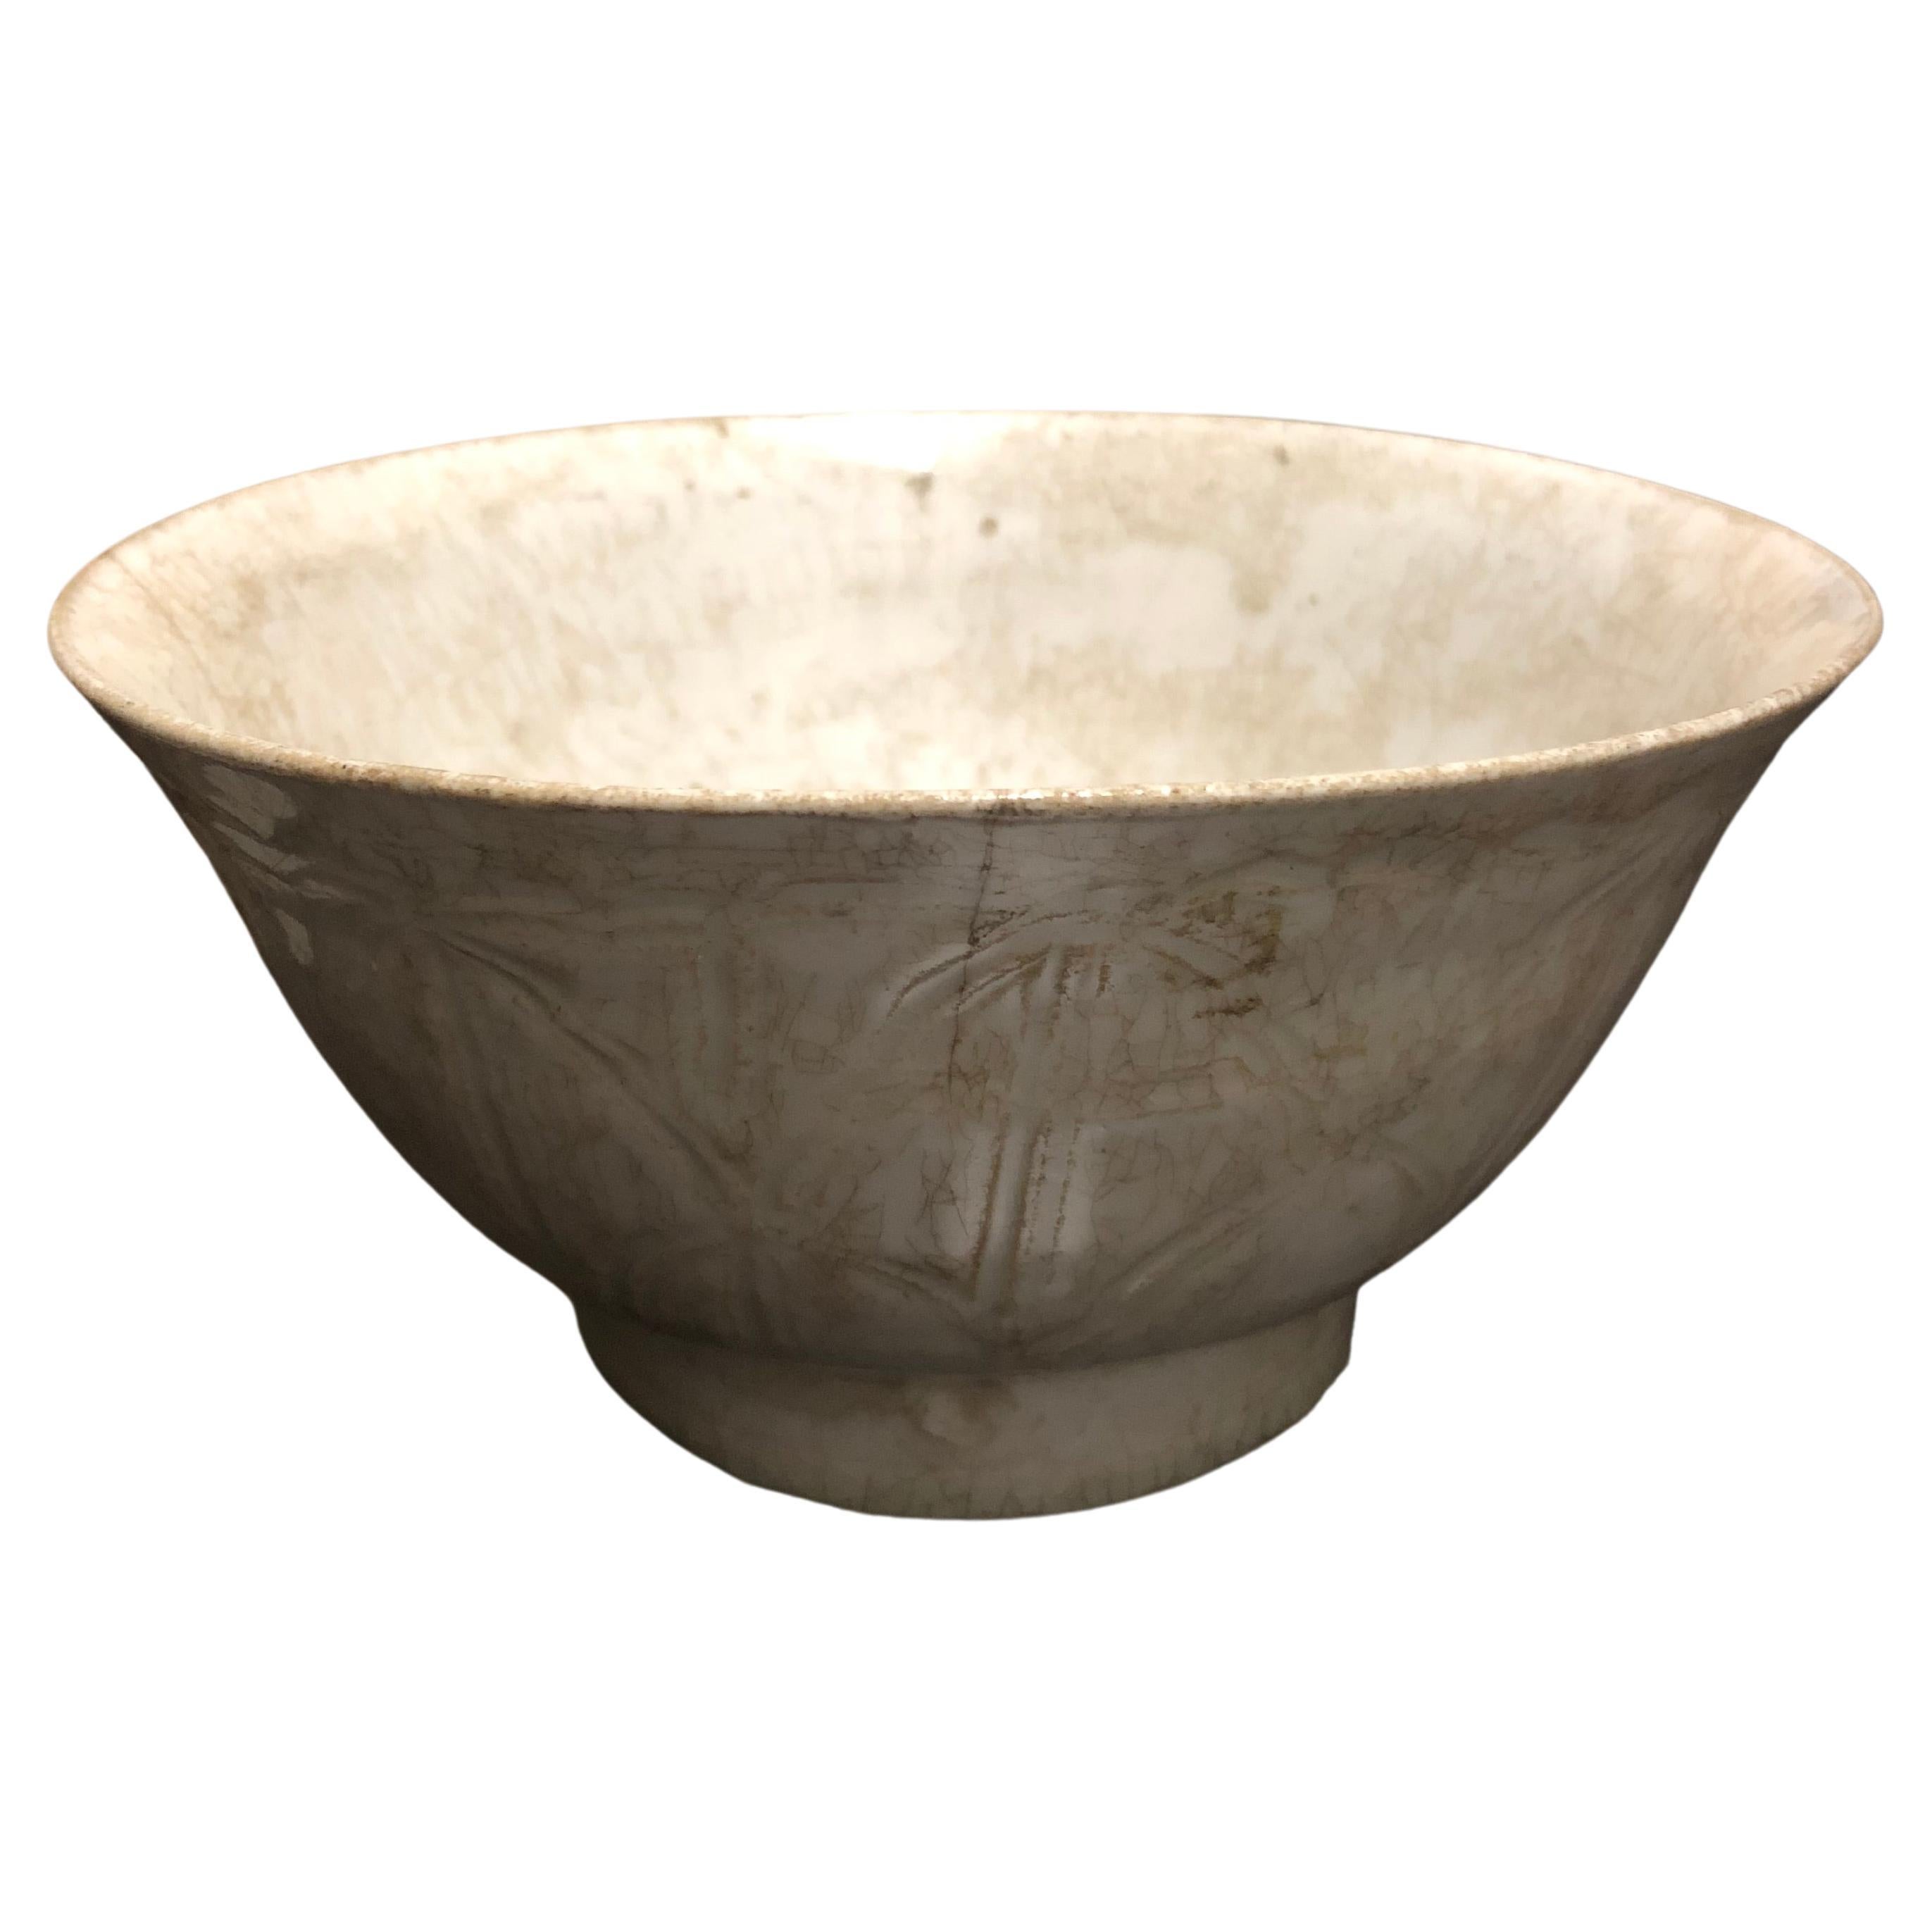 A finely thin potted white glazed bowl, with incised lotus blossom pattern decoration from the Joseon period, Korea, circa 1400.

It has an old collection number inscribed in pen on the inside of the foot of the bowl.

This bowl is structurally